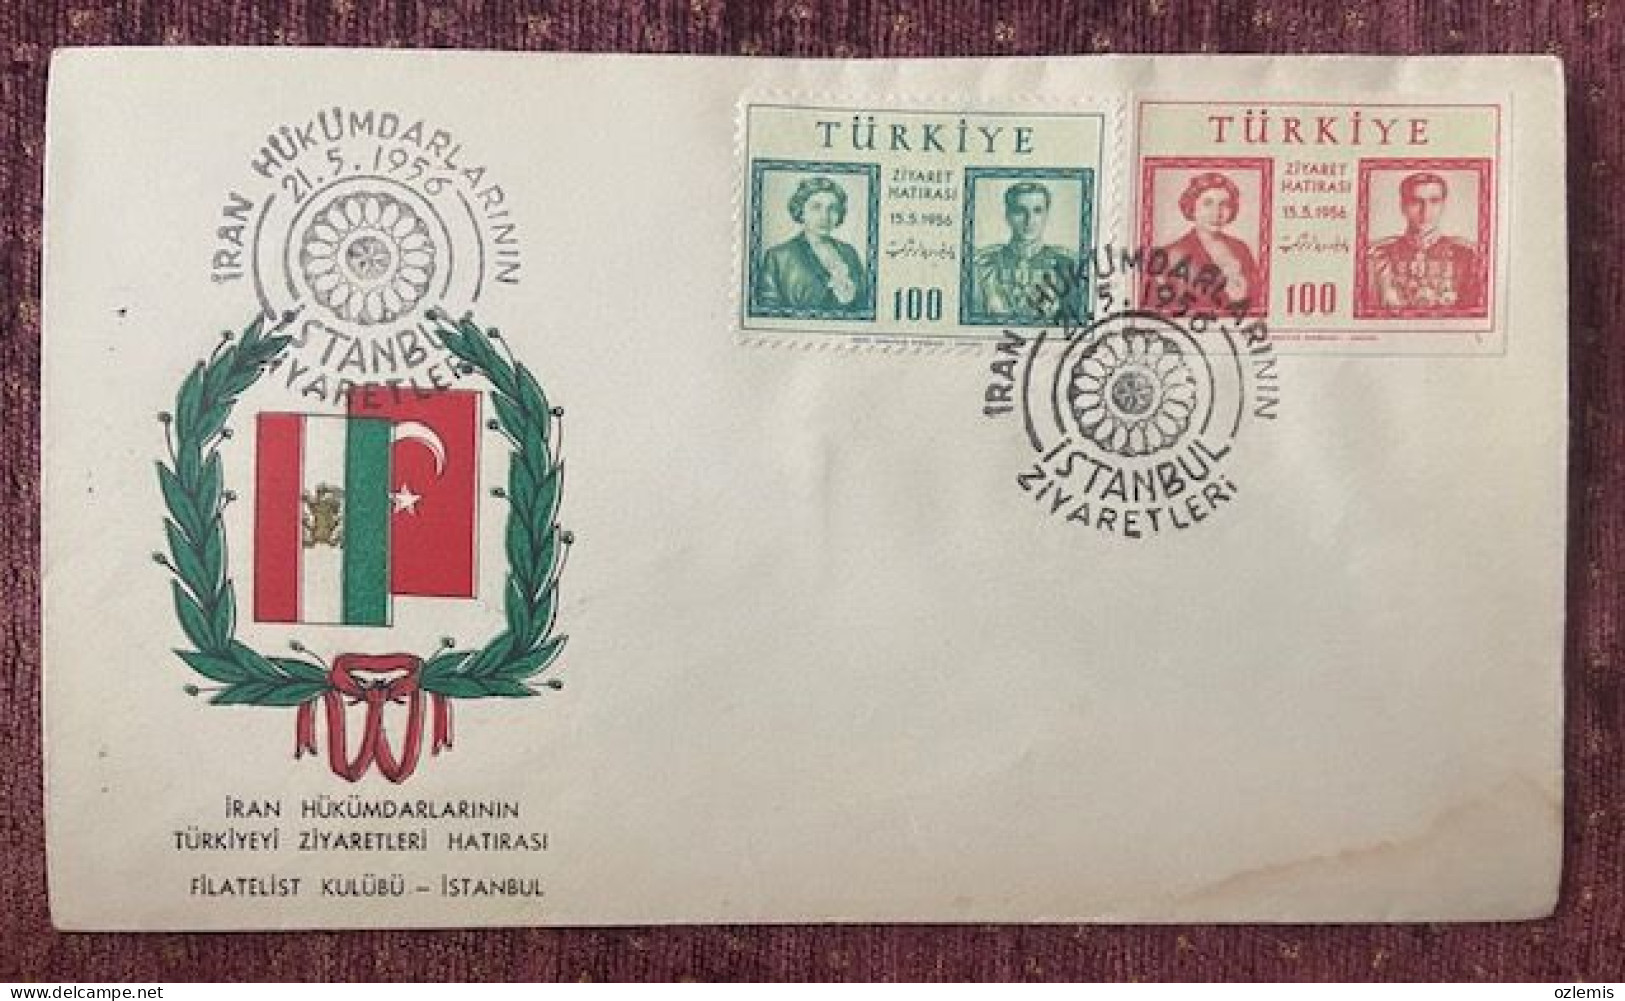 TURKEY,TURKEI,TURQUIE , MEMORY OF ,IRAN'S,VISITS TO TURKEY ,1956 ,COVER - Covers & Documents